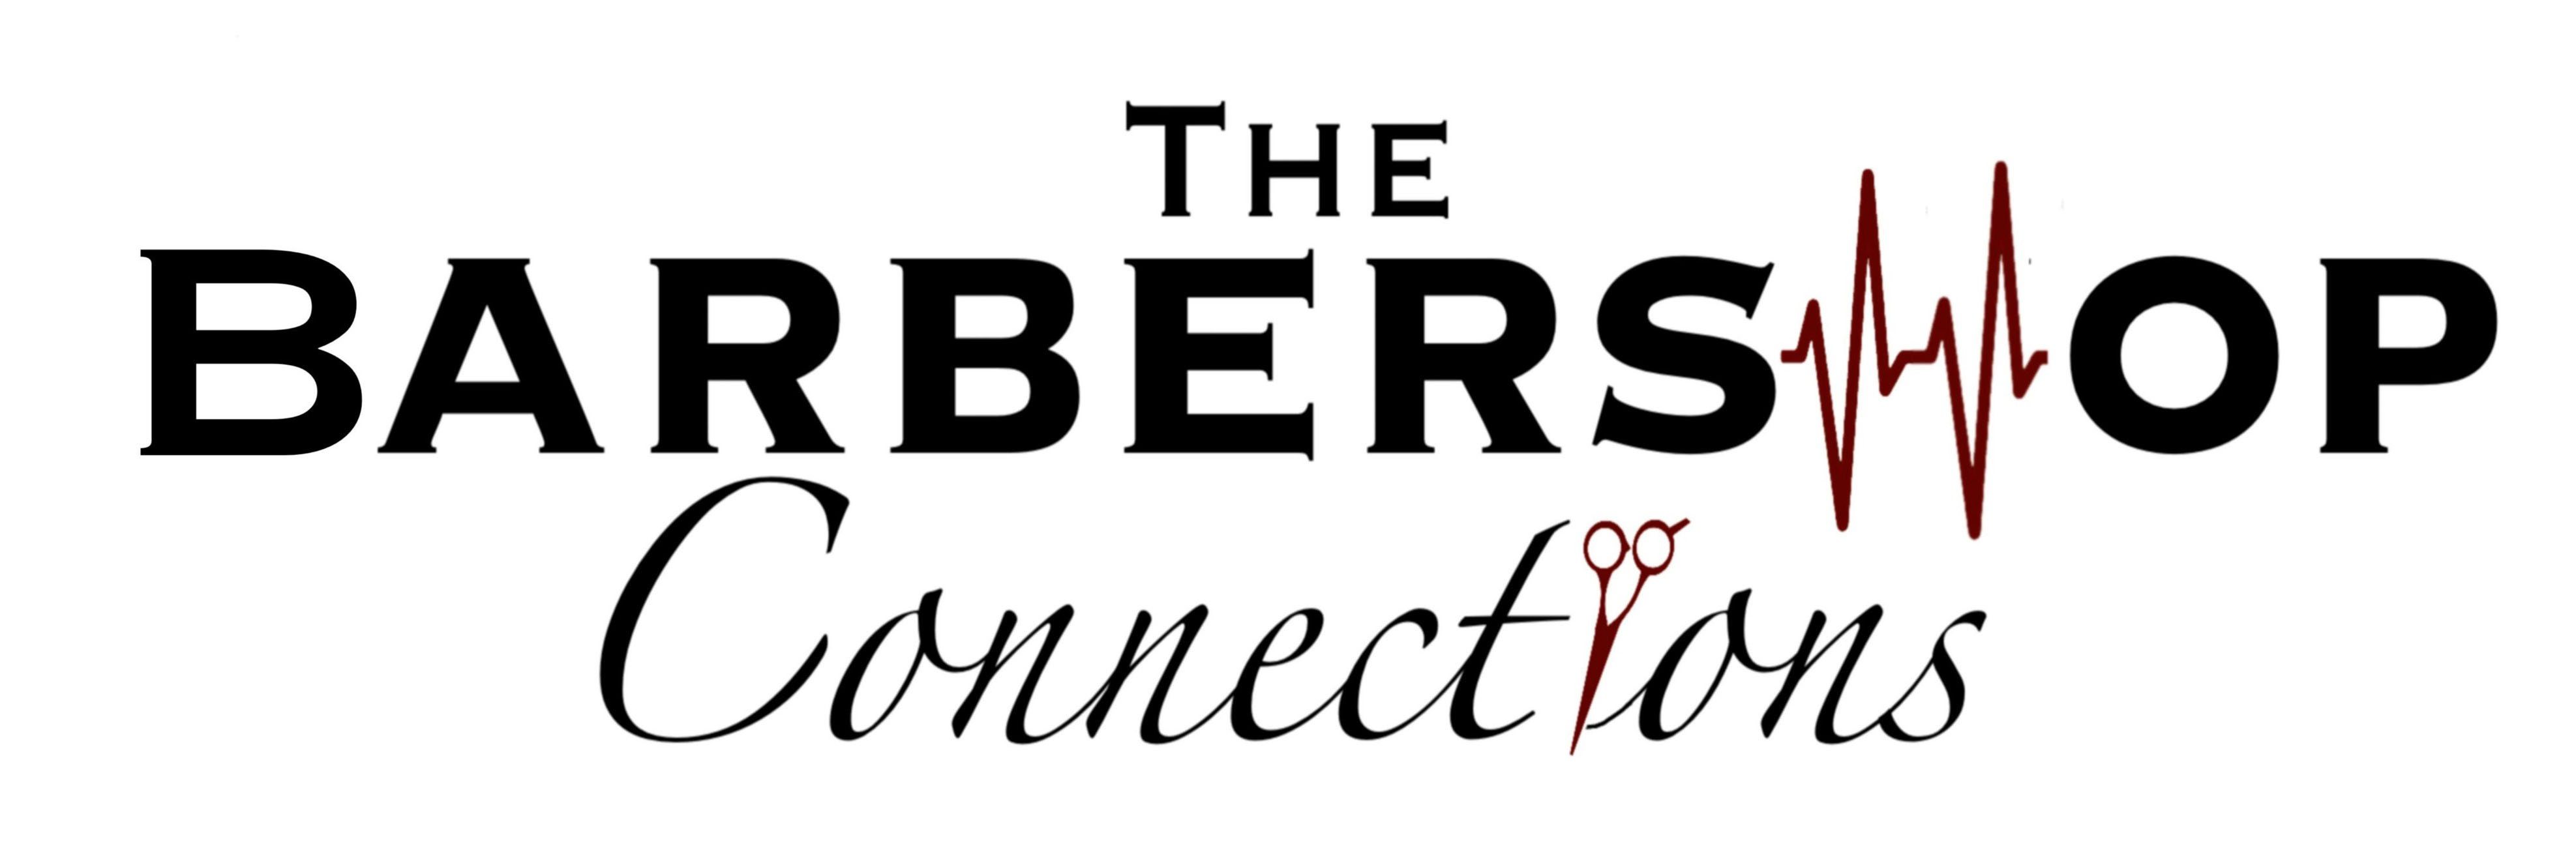 The Barbershop Connections logo